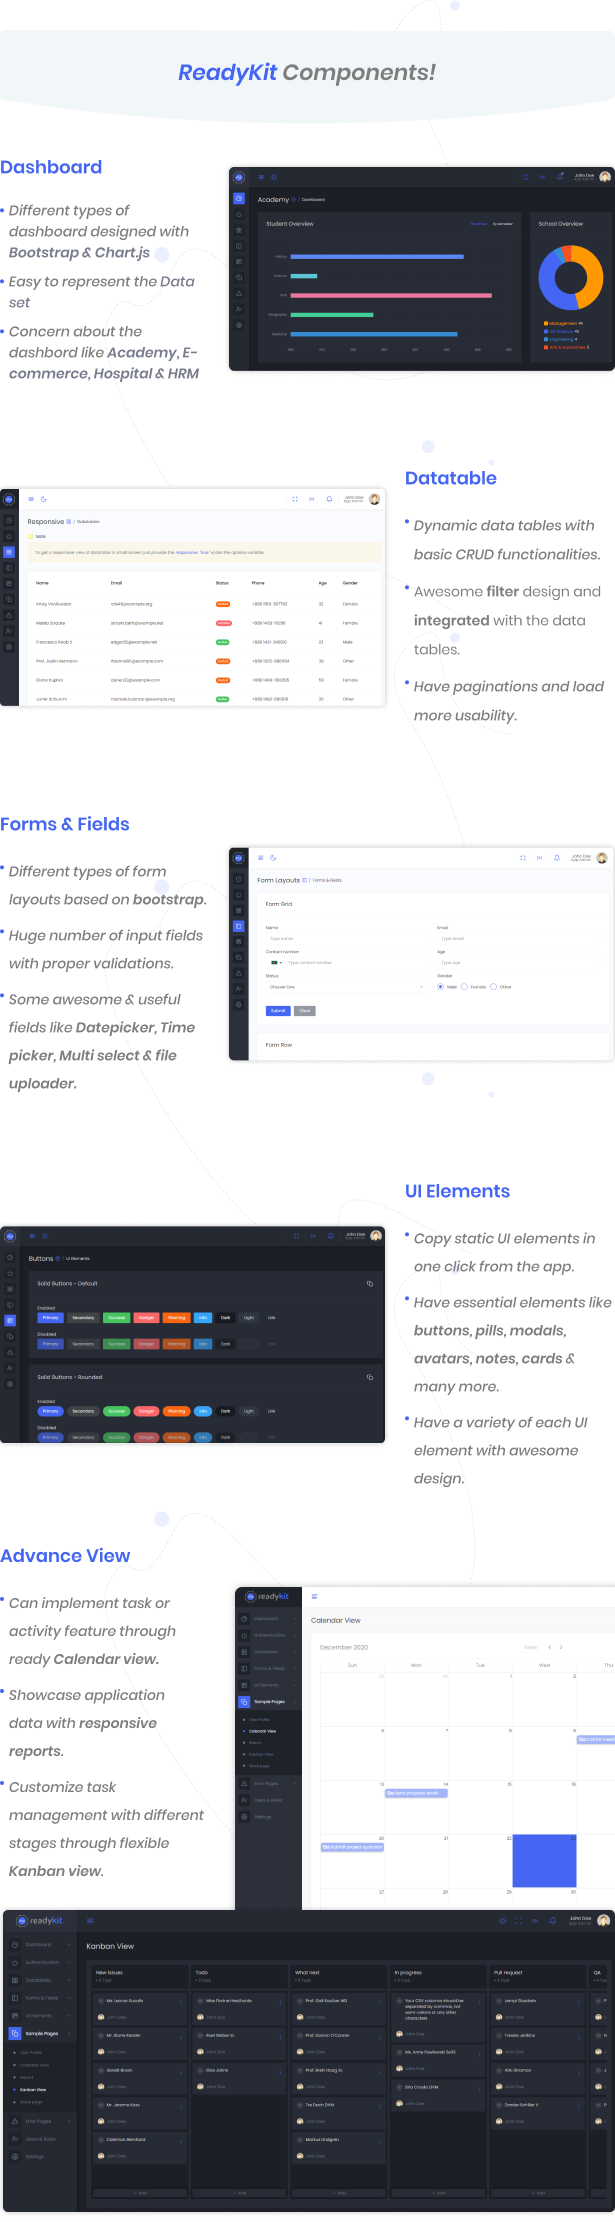 ReadyKit -  Admin & User Dashboard Templates (with functionality) for Laravel + Vue App Development - 6